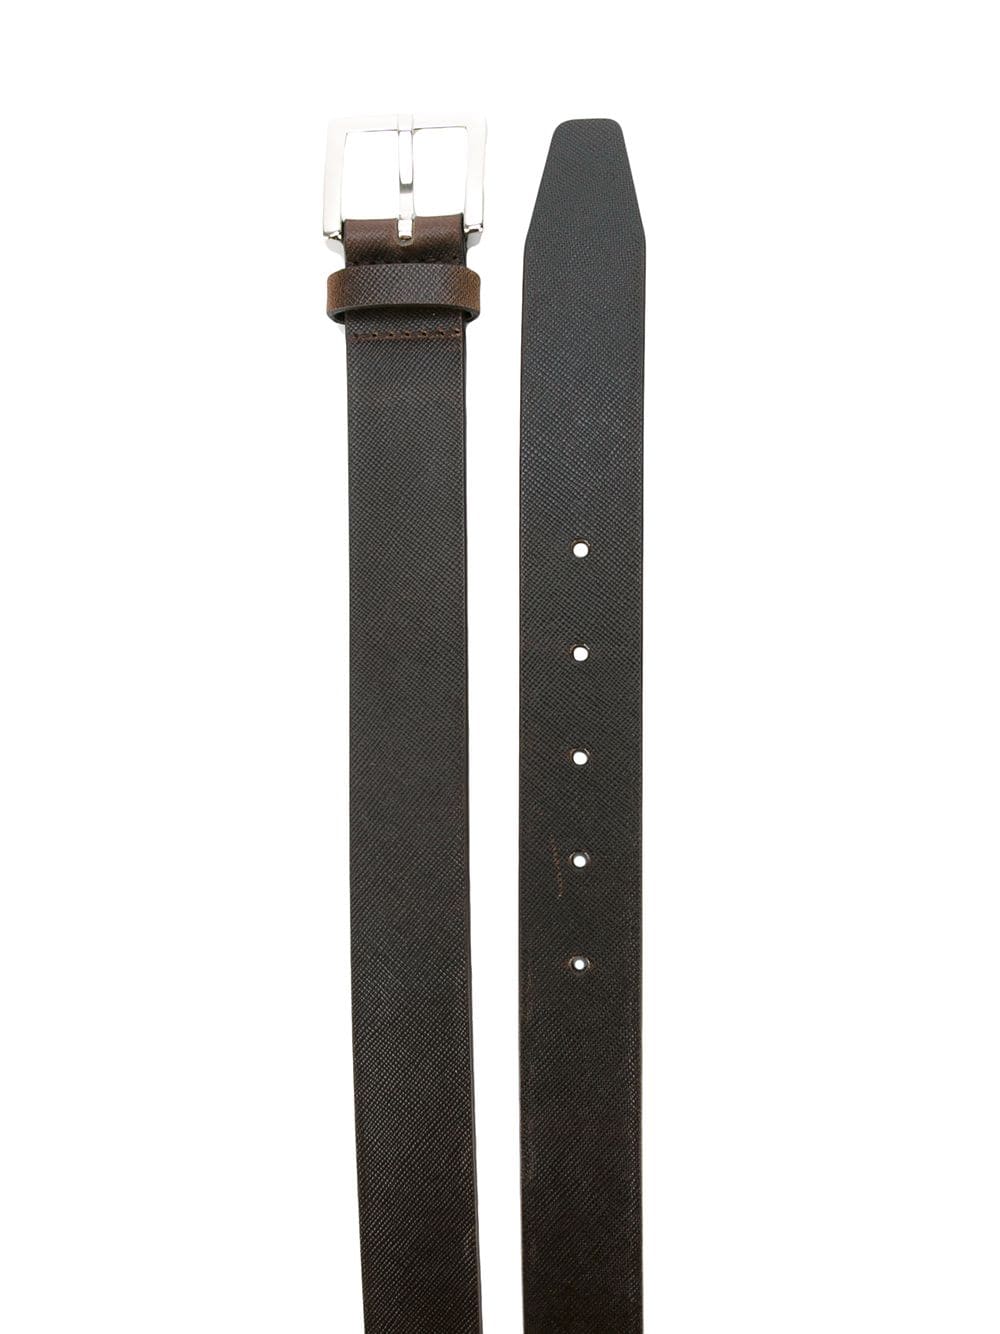 Dark brown belt with square buckle